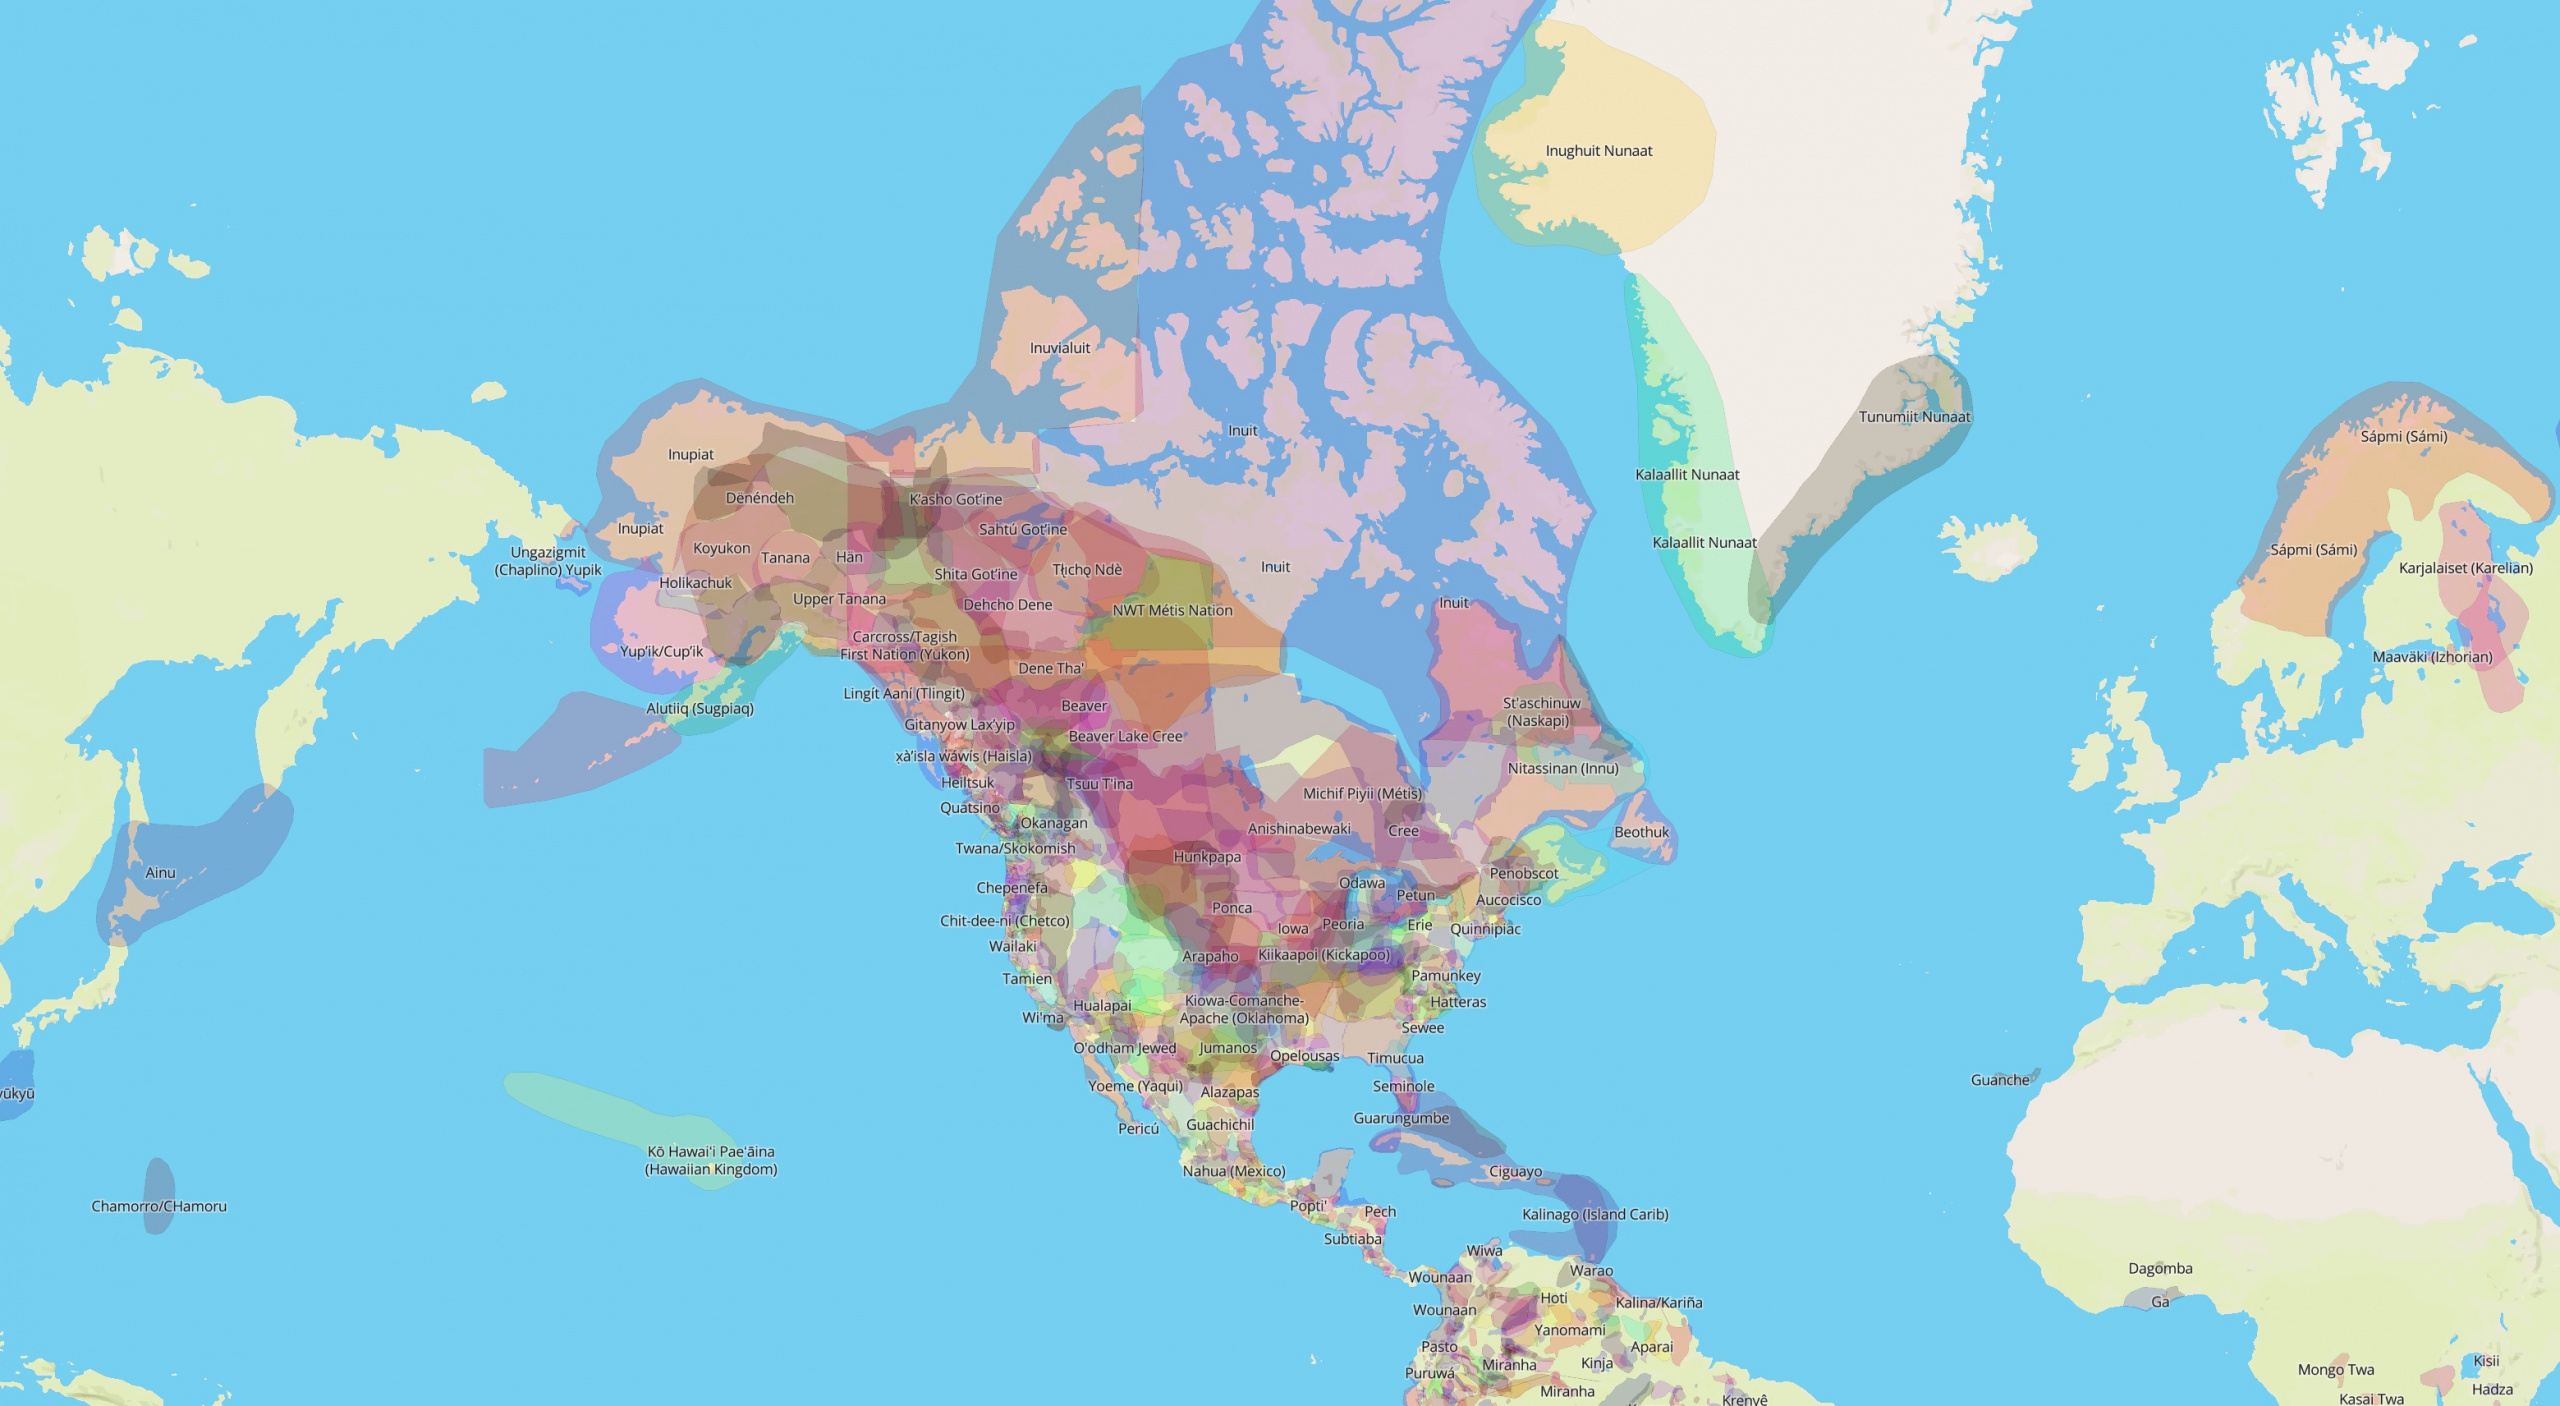 A map of Canada with Indigenous territories displayed.